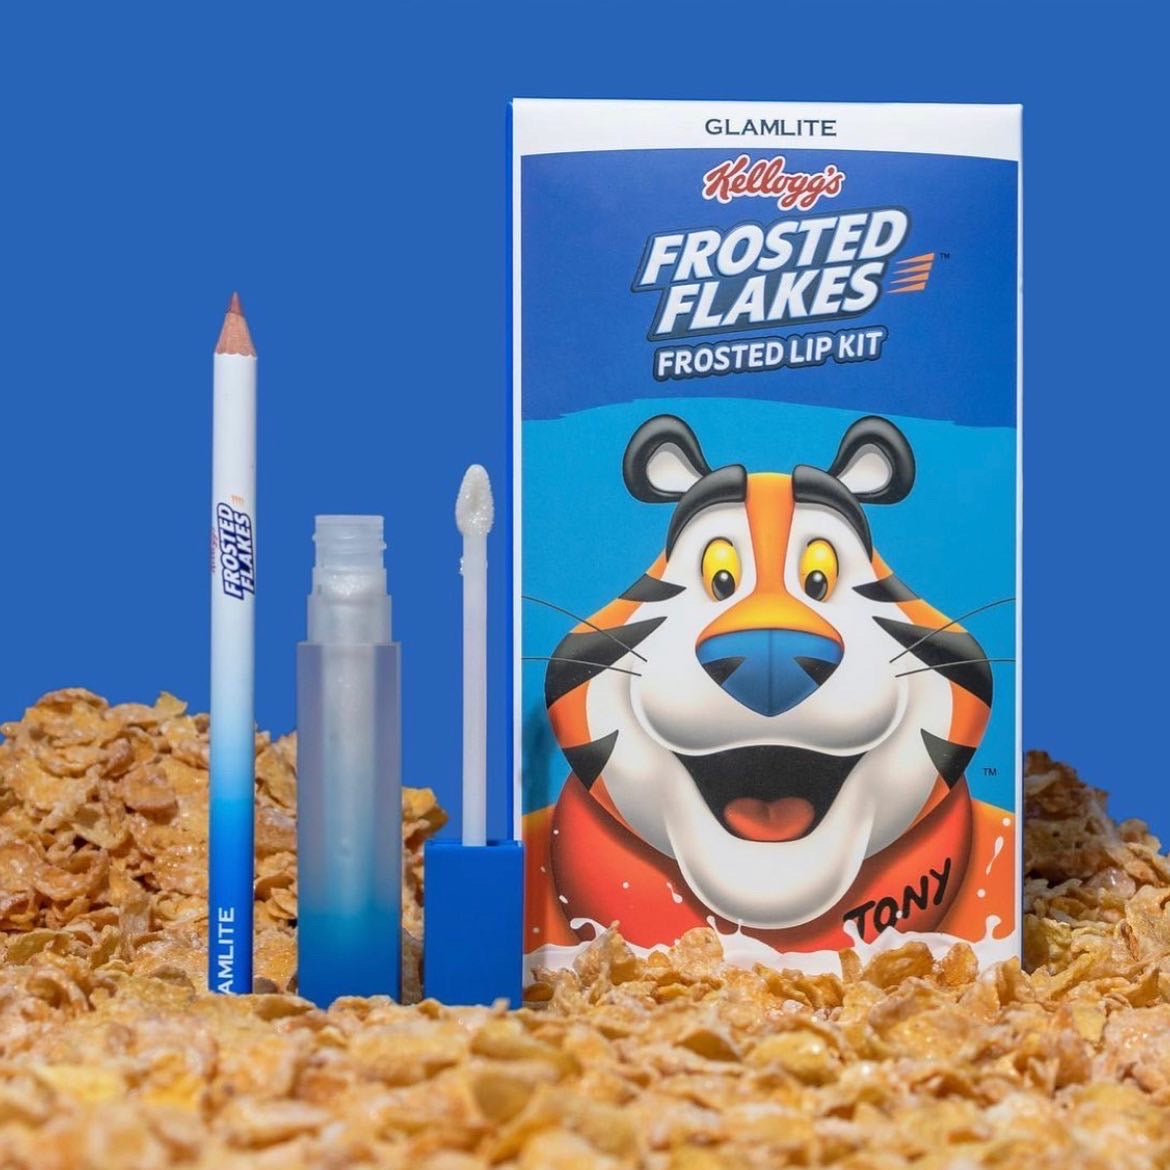 Frosted Flakes x GLAMLITE Frosted Lip Kit – Glamlite